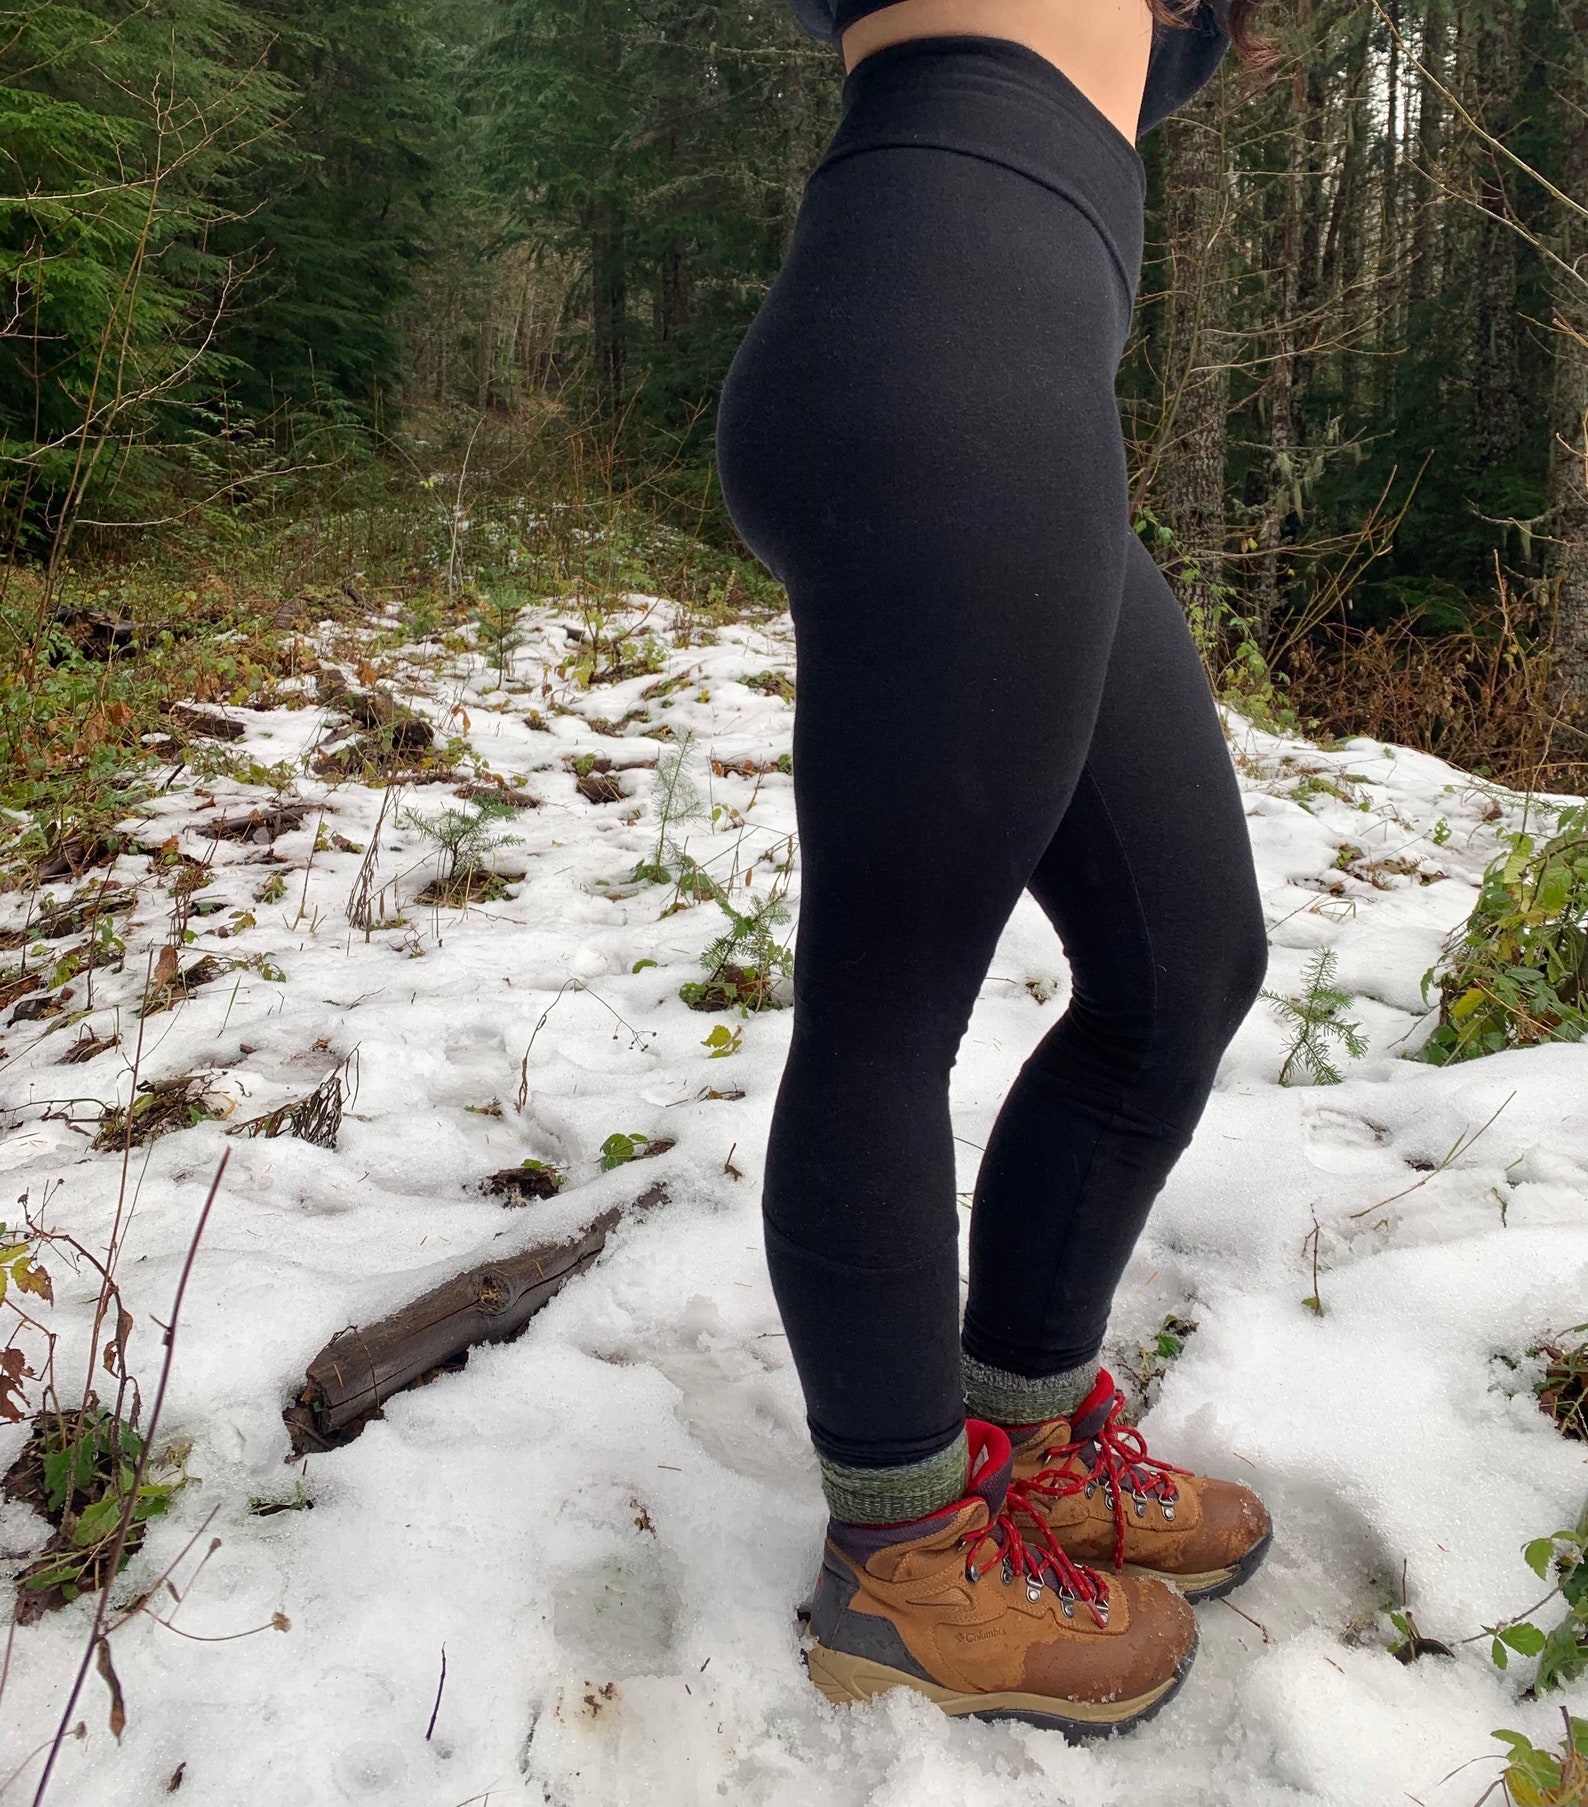 14 Of The Best Fleece-Lined Leggings To Keep Your Legs Toasty Warm